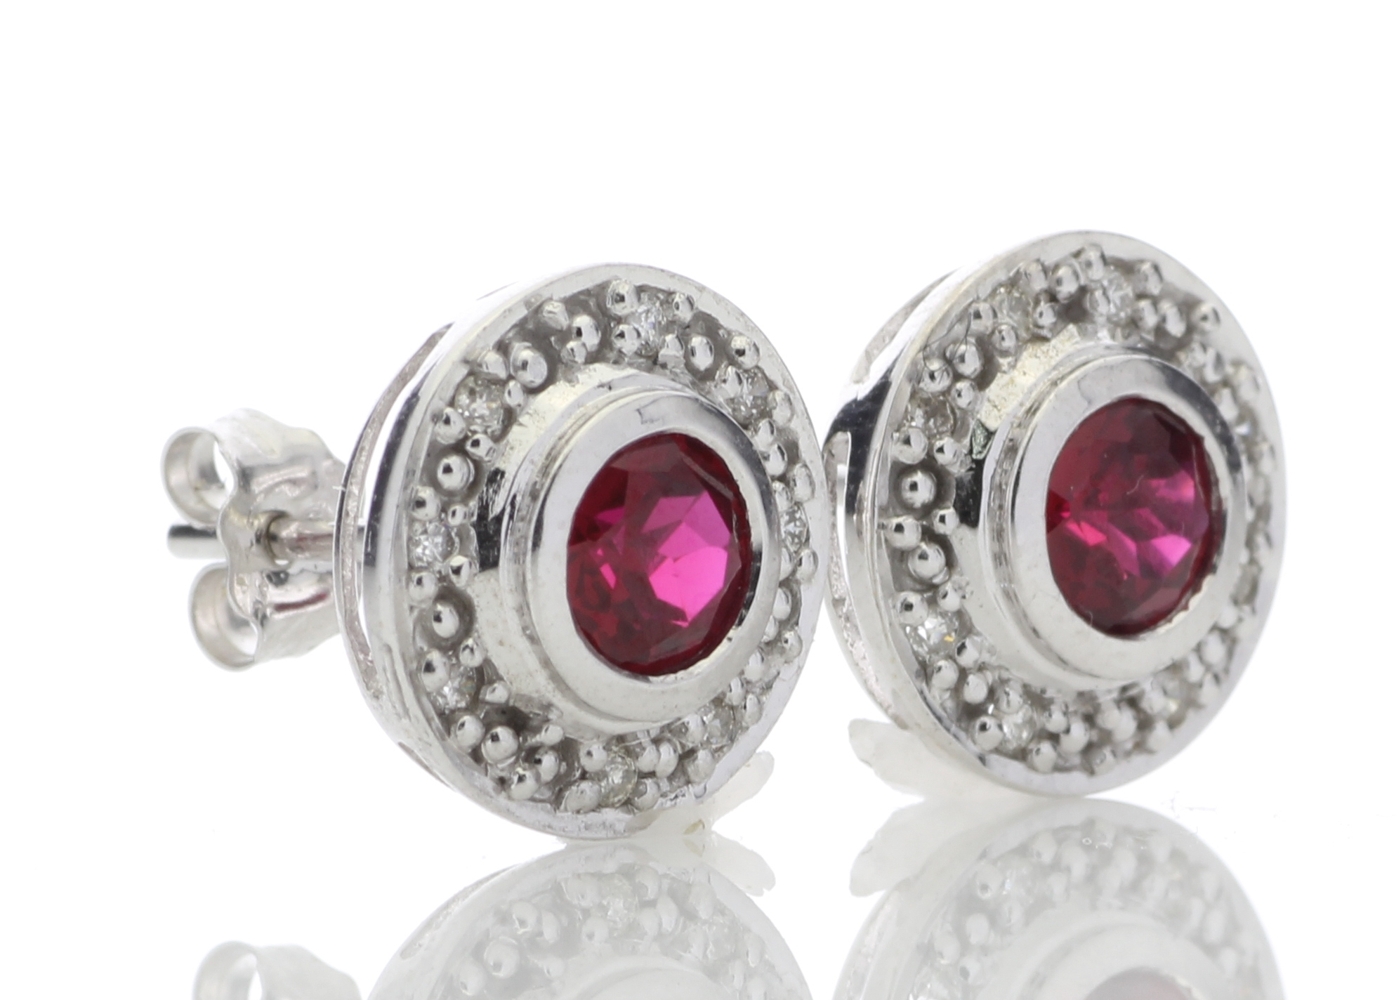 9ct White Gold Created Ruby Diamond Earring 0.16 Carats - Image 4 of 5